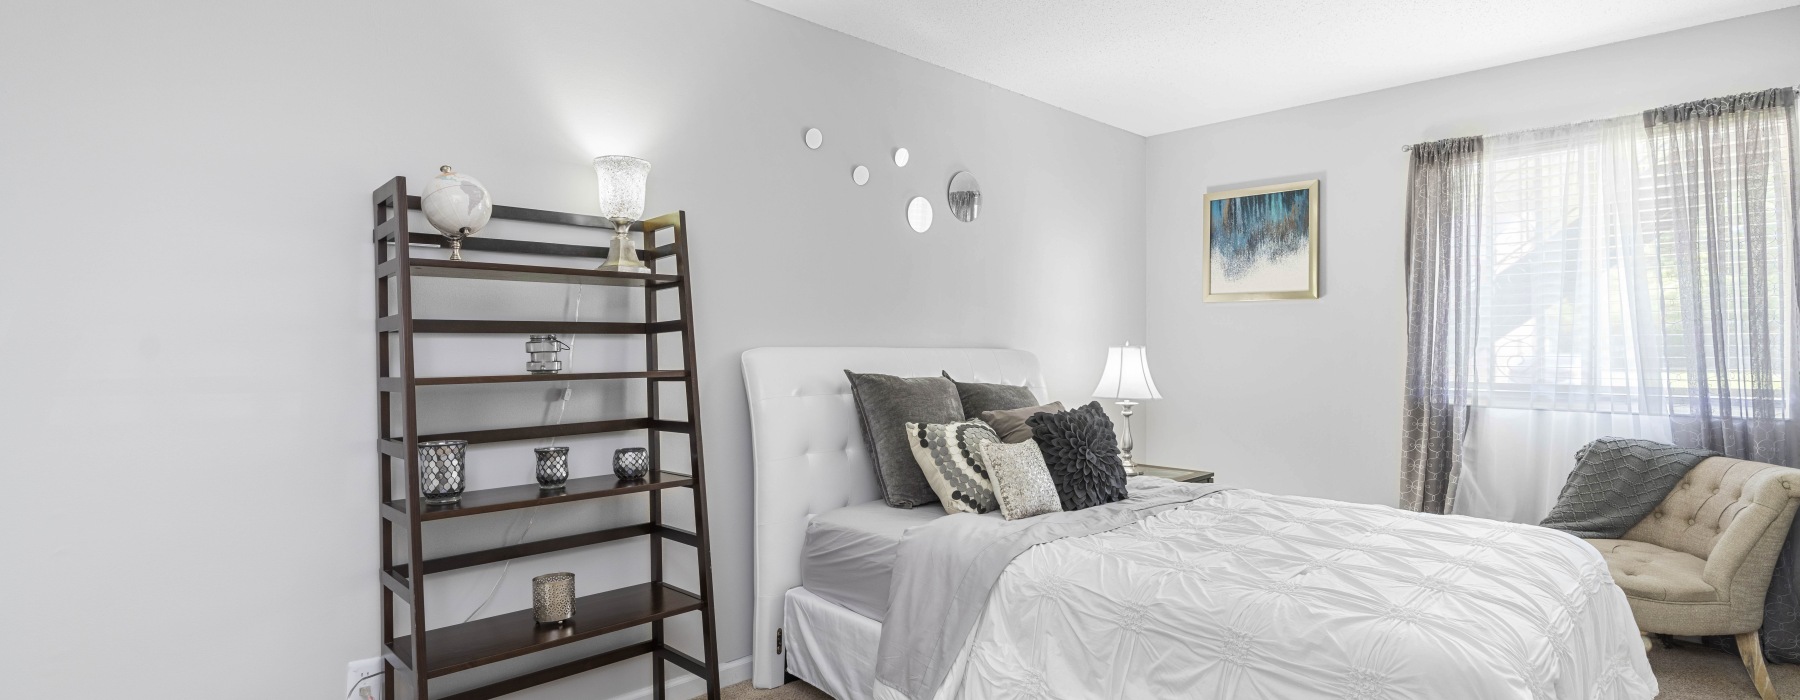 spacious, brightly lit bedroom with accent wall